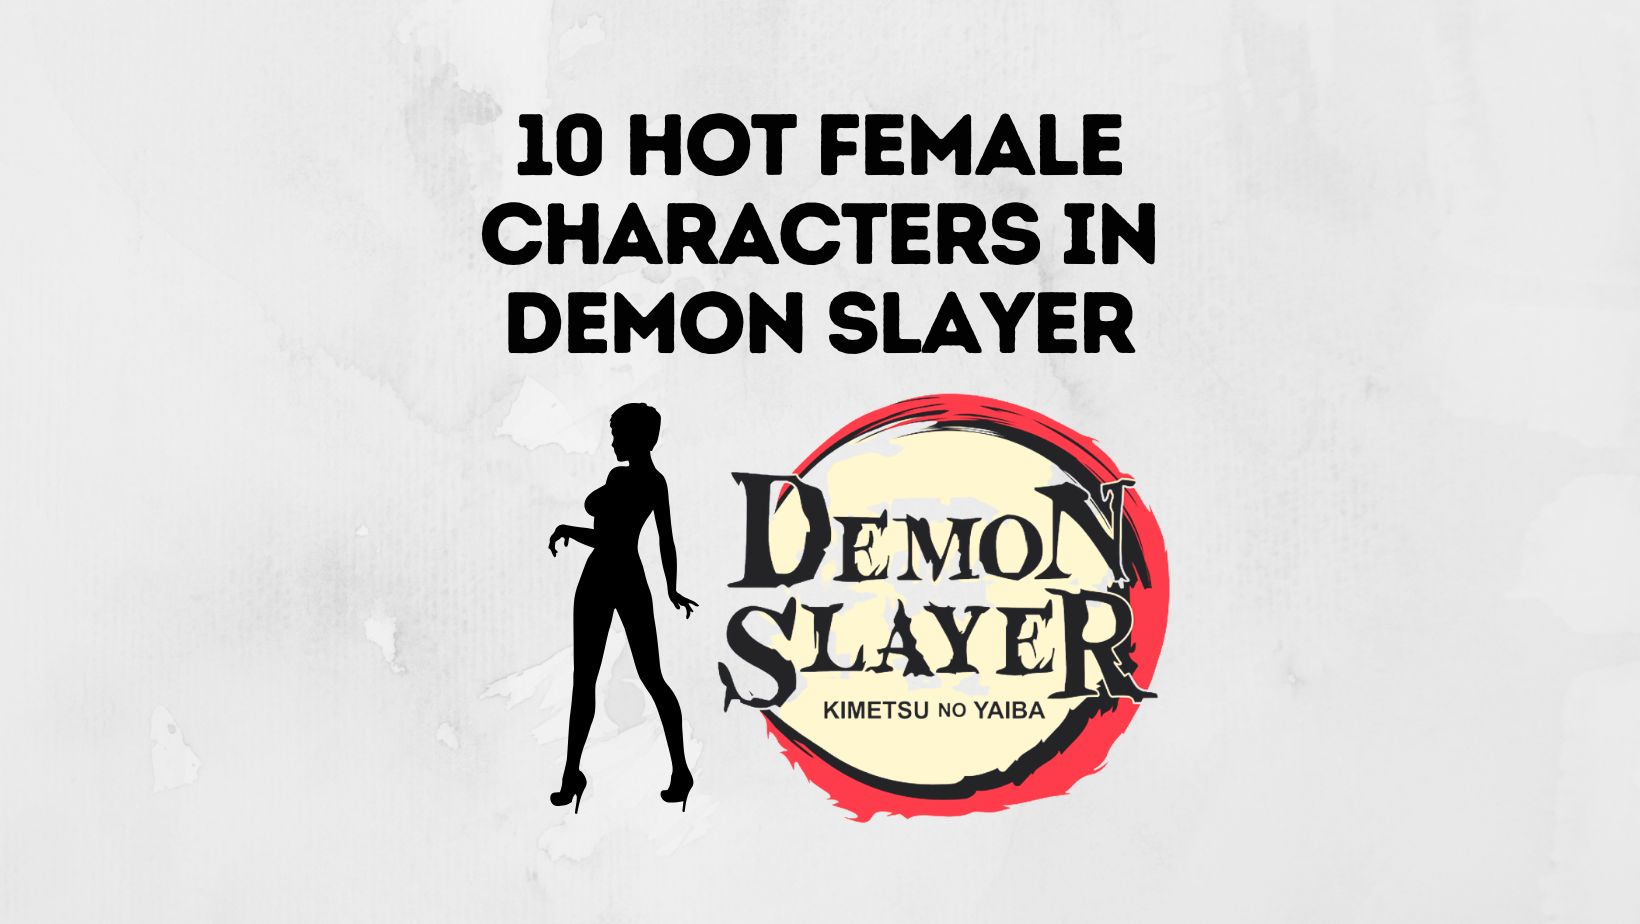 10 Hot Female Characters in Demon Slayer